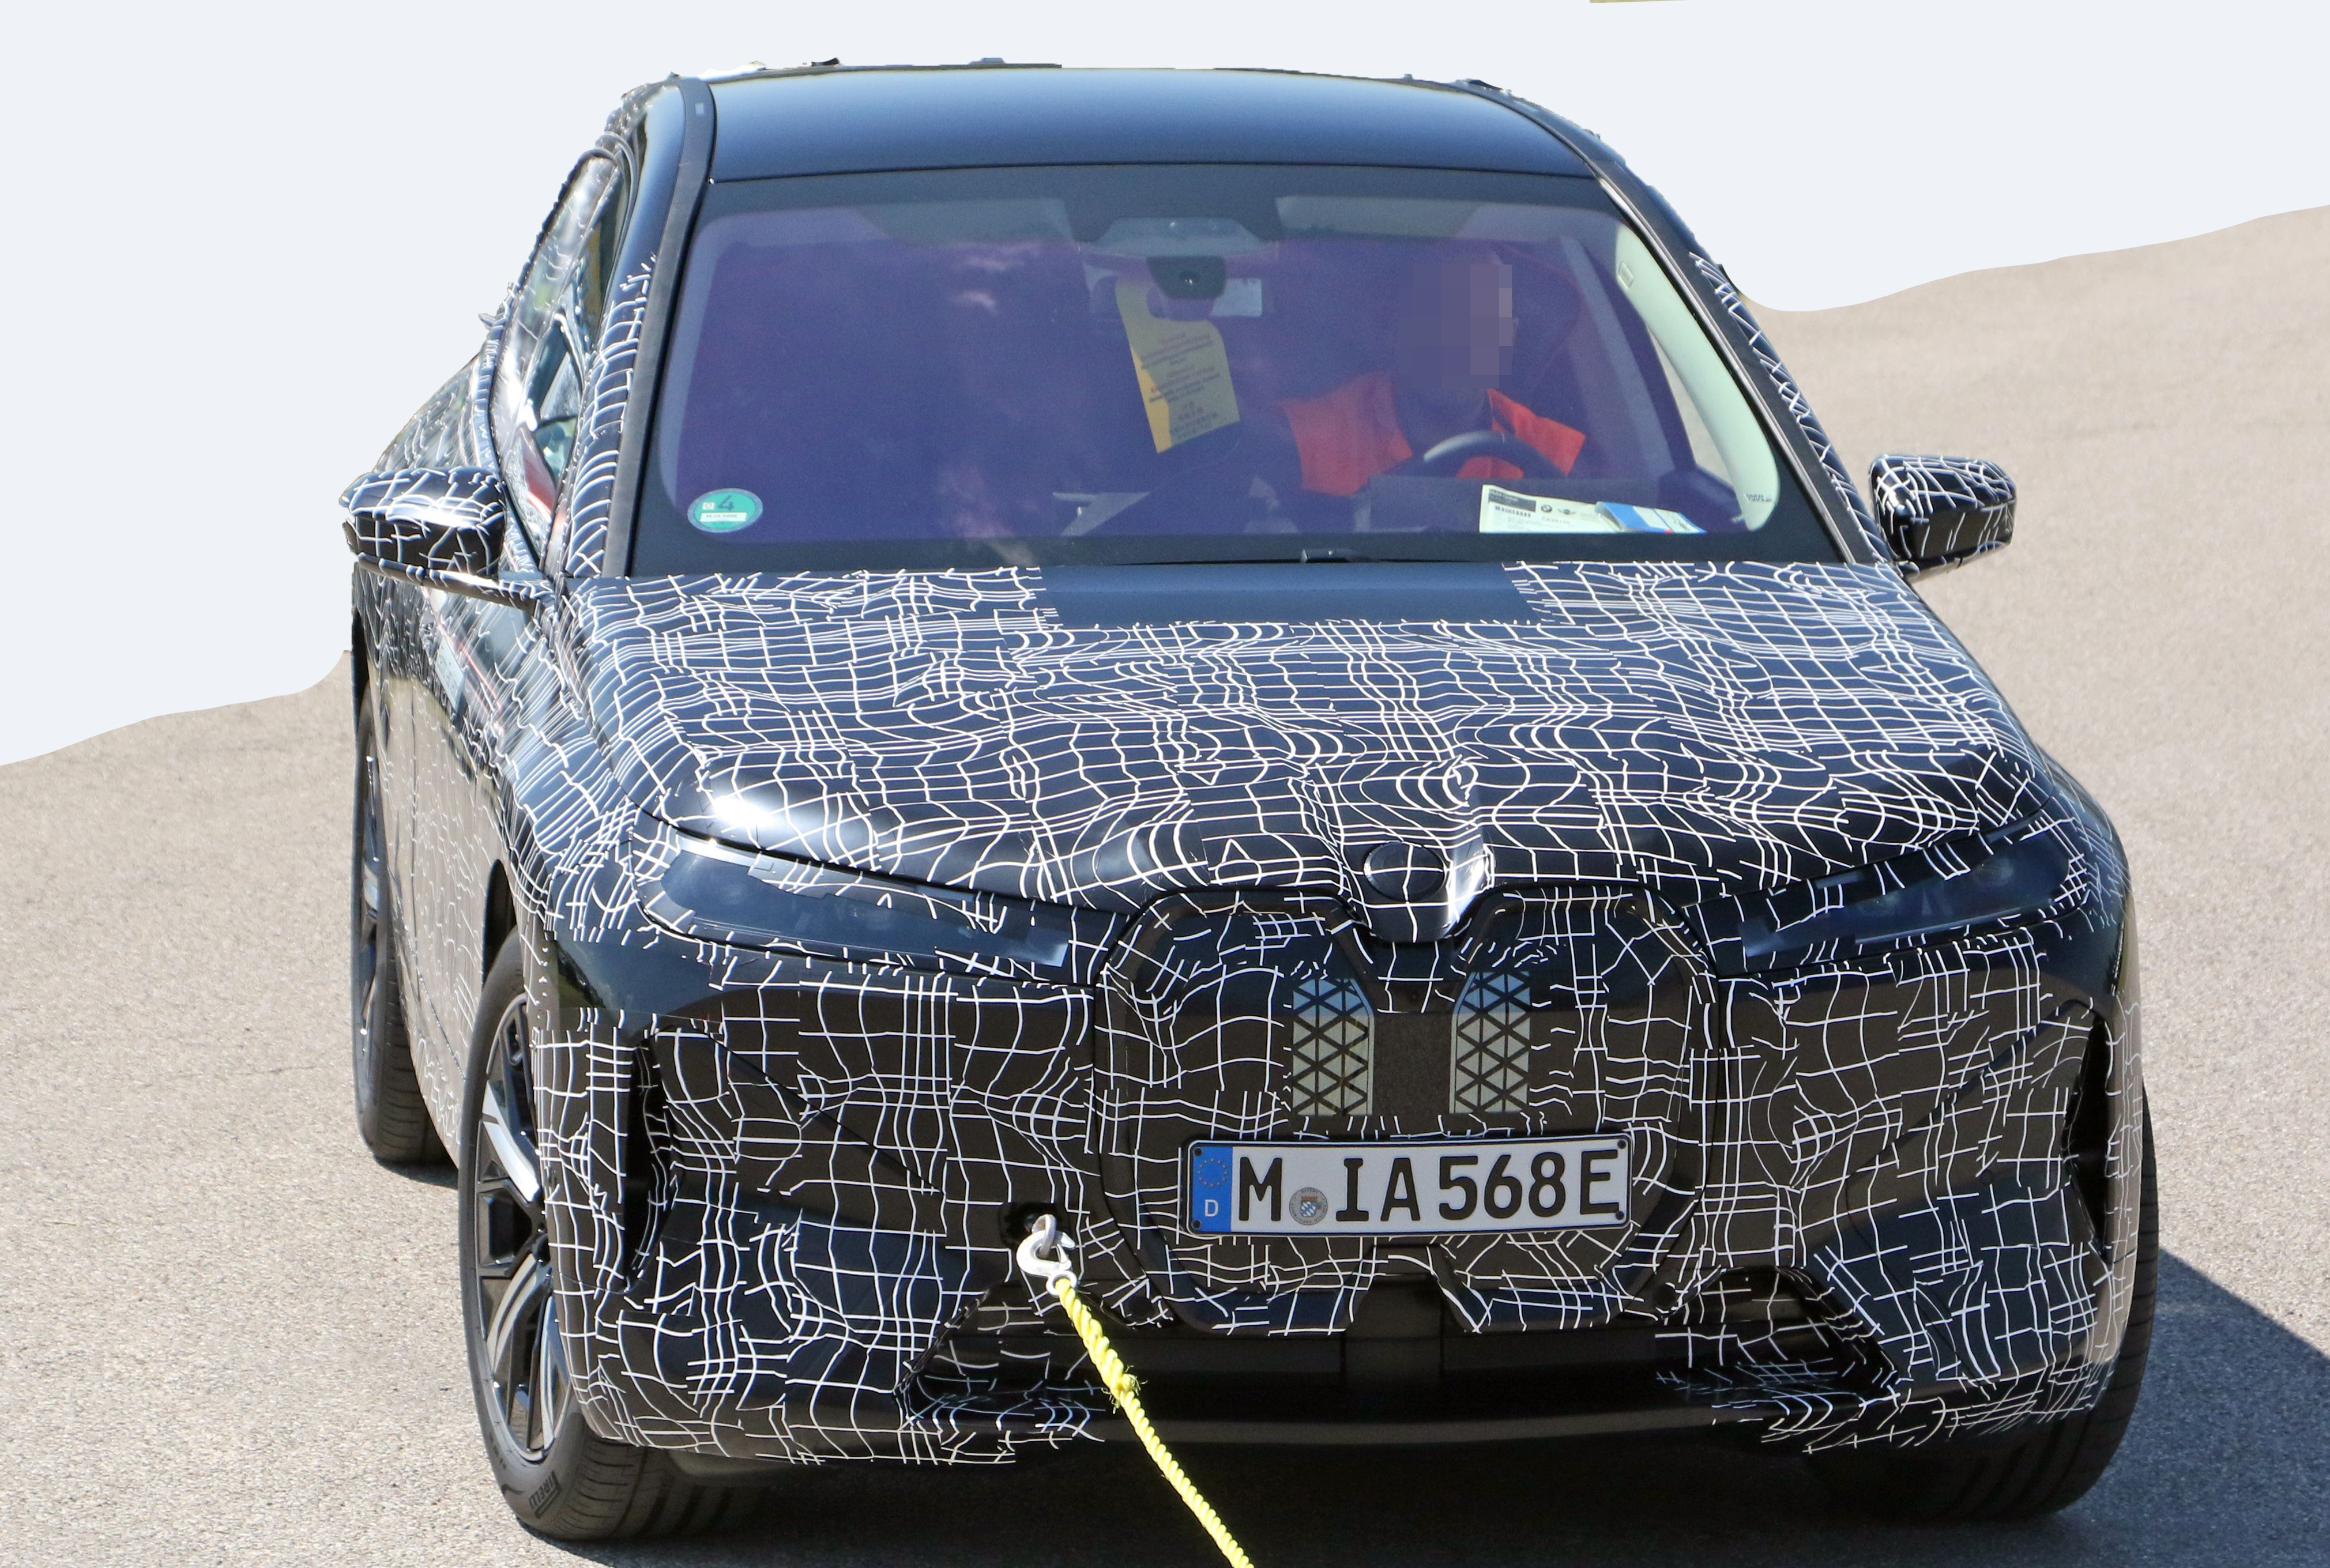 2022 BMW iNext Electric SUV